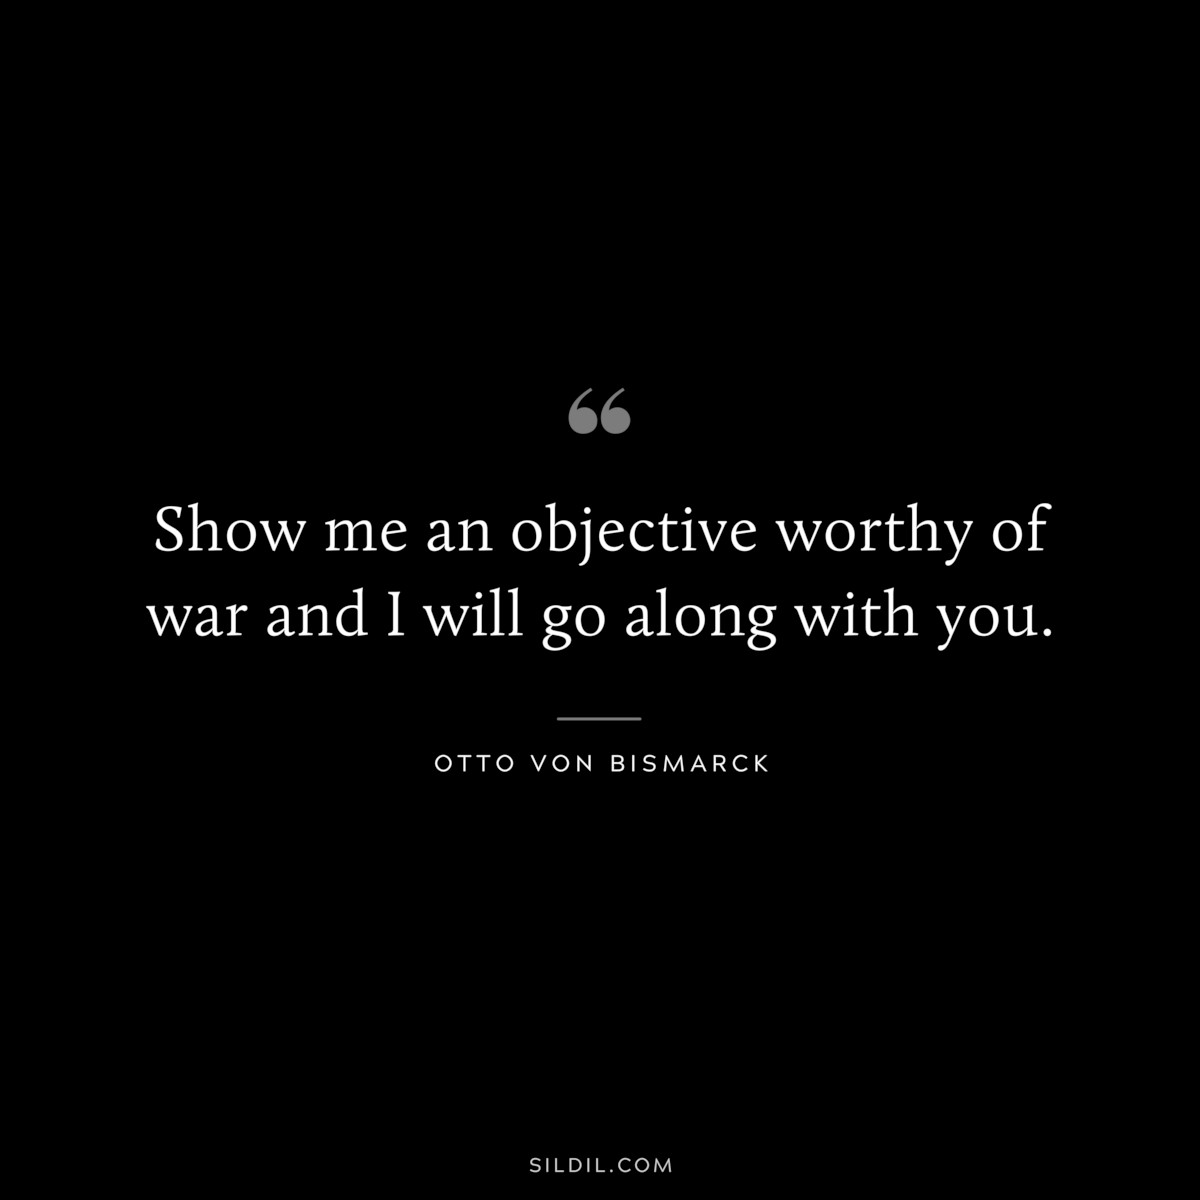 Show me an objective worthy of war and I will go along with you. ― Otto von Bismarck